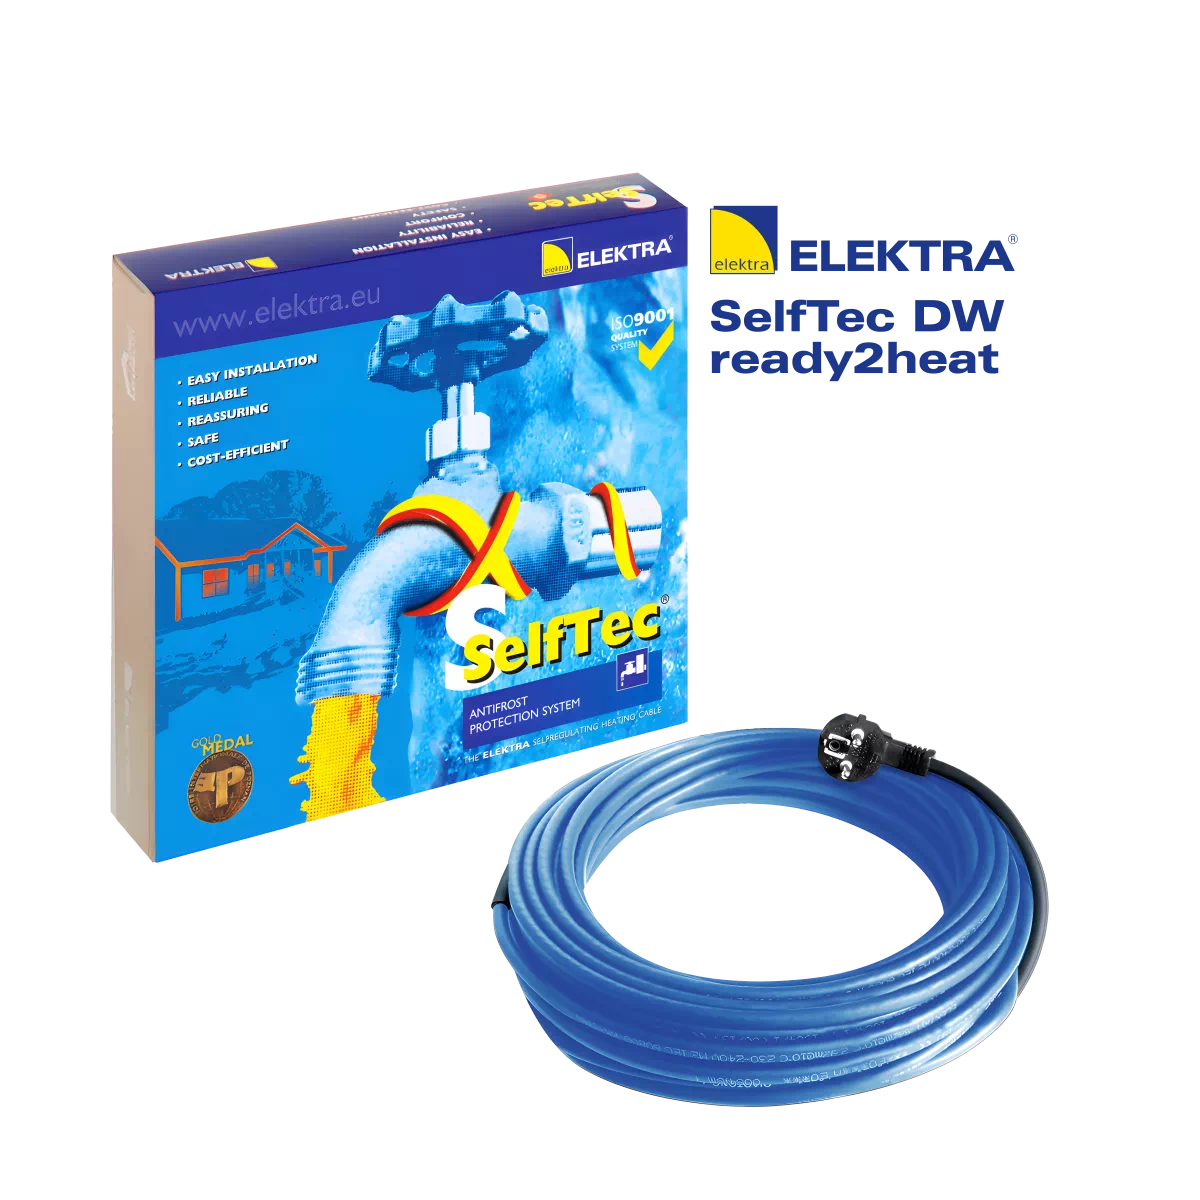 ELEKTRA-SelfTec-DW-ready2heat-Electric-Heating-Cable